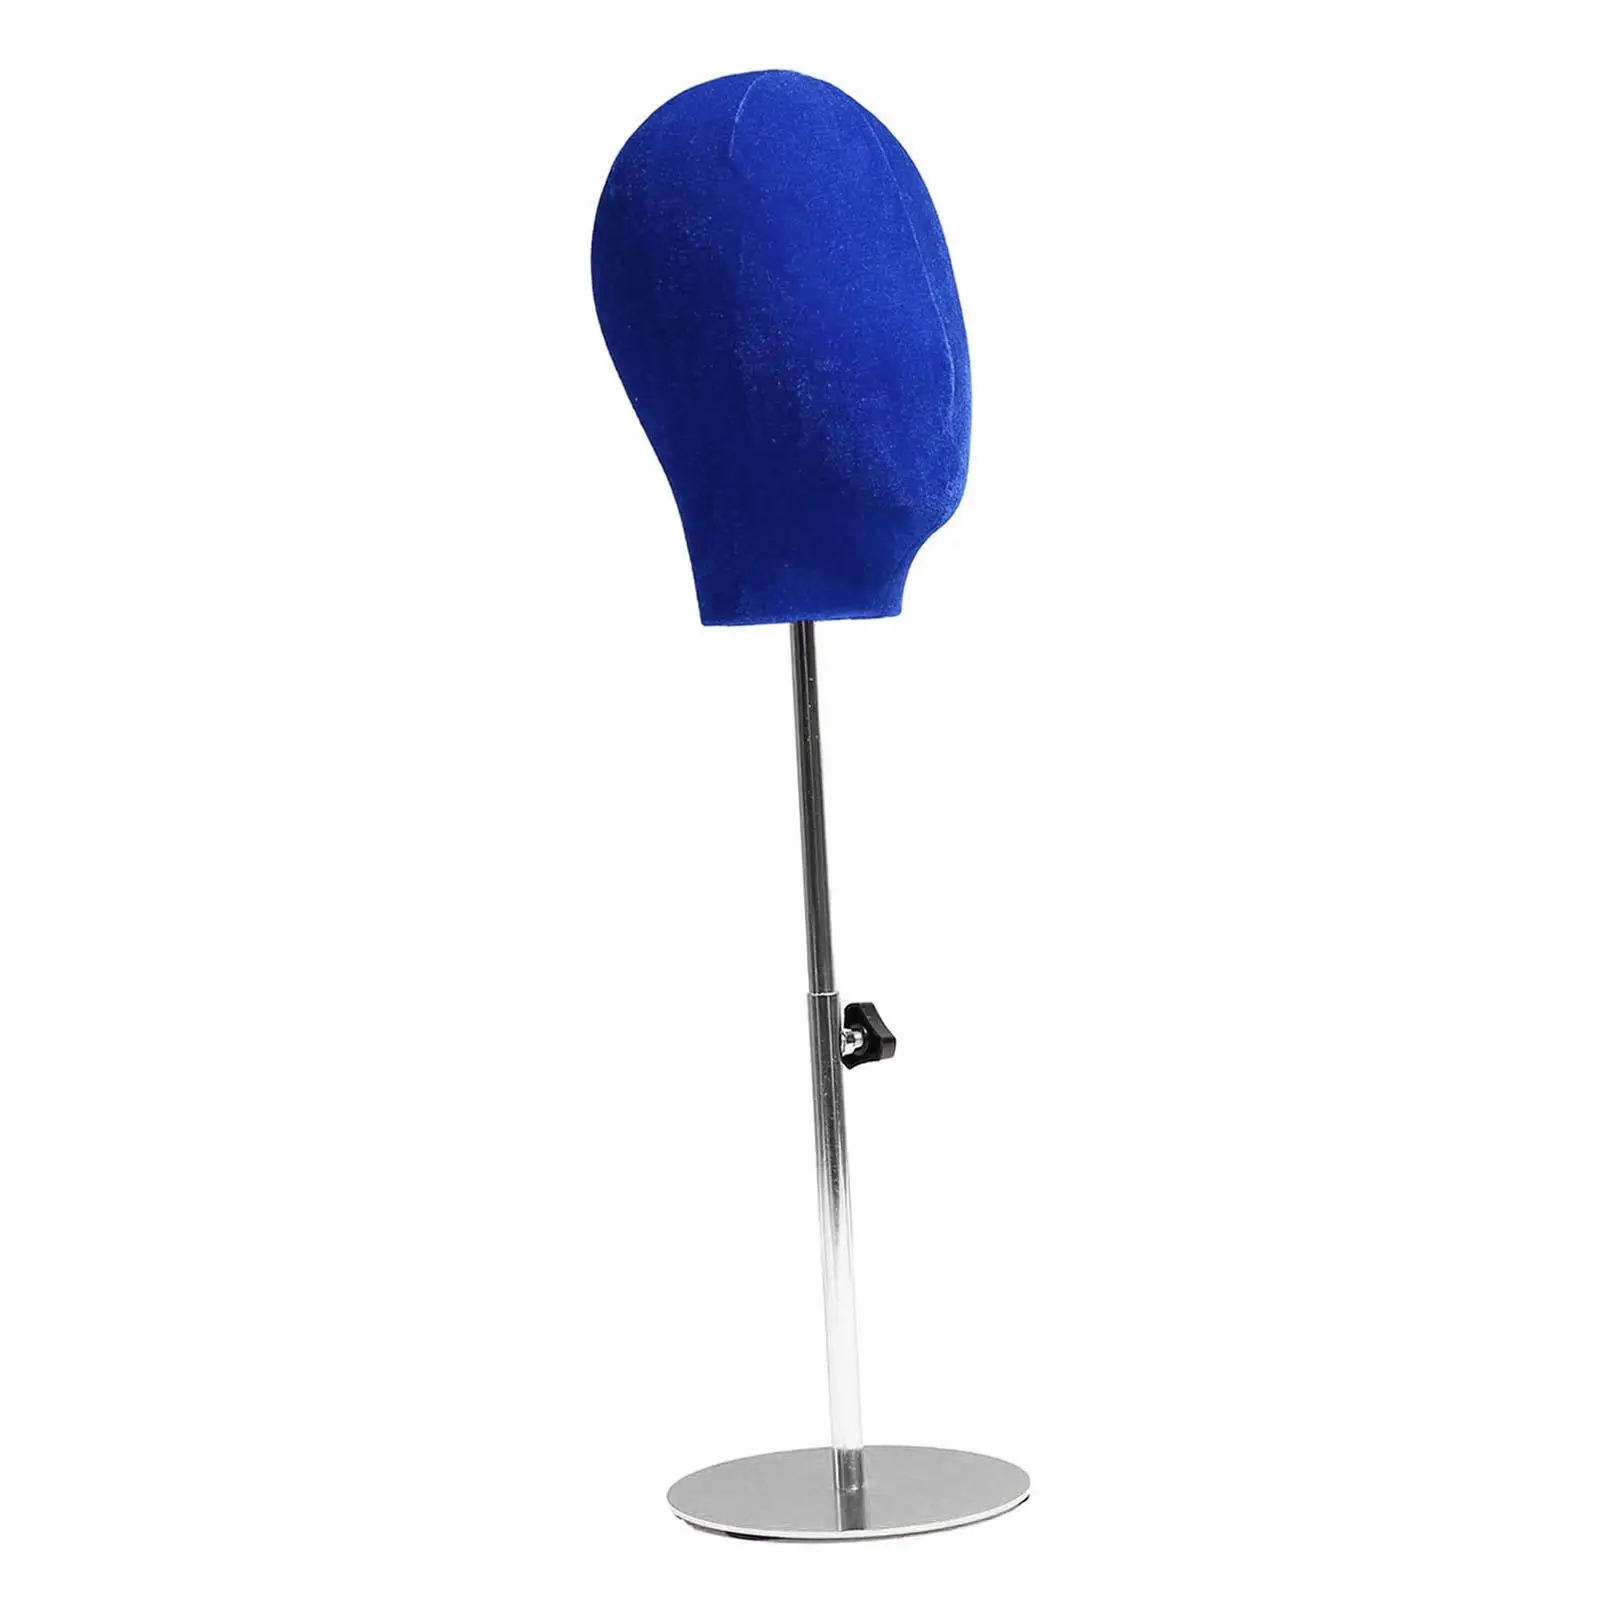 Hat Display Stand Manikin Head Height Adjustable Portable for Styling Hats Display